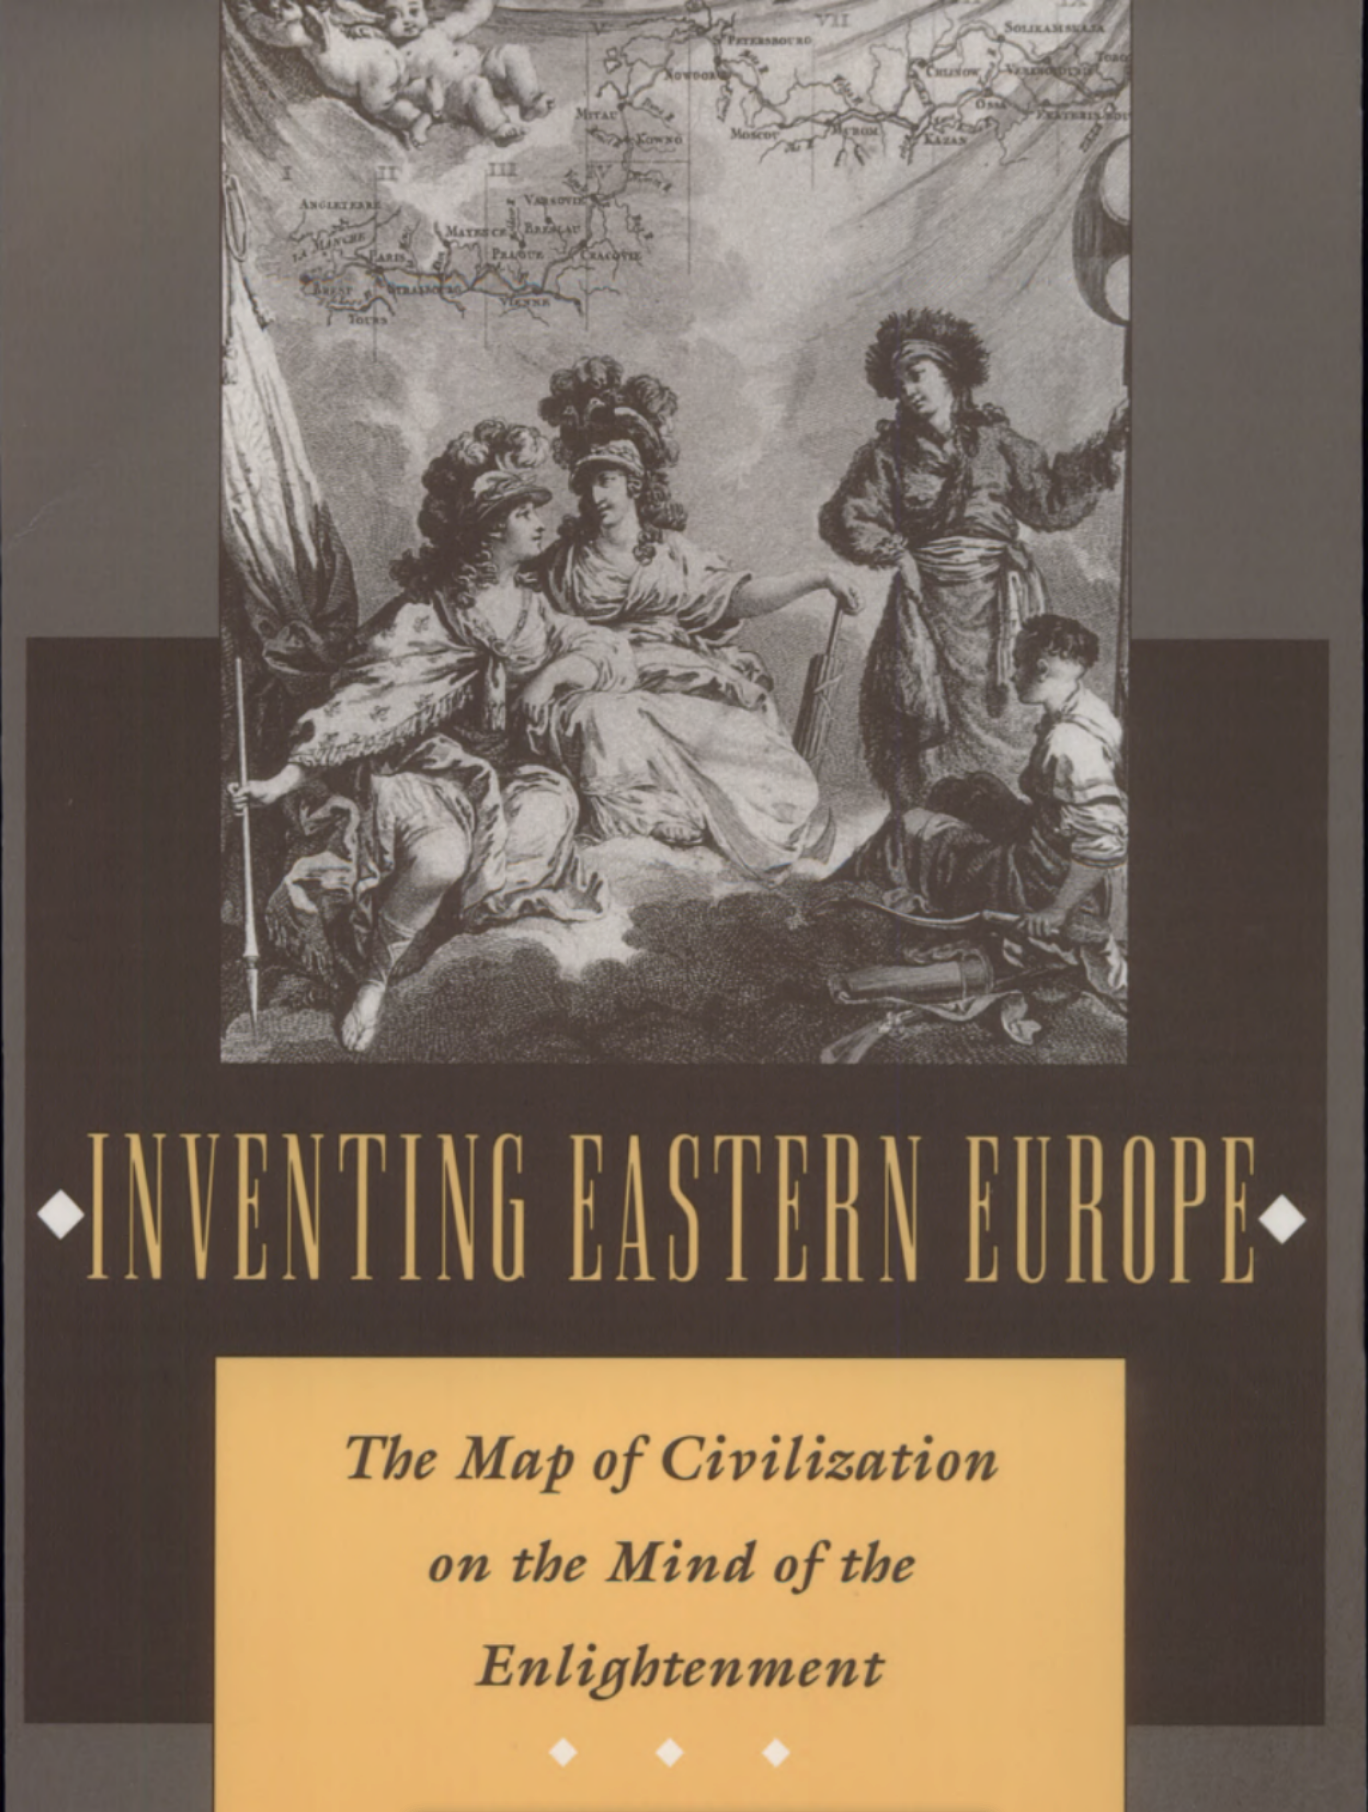 Book Review: Inventing Eastern Europe: The Map of Civilization on the Mind of the Enlightenment